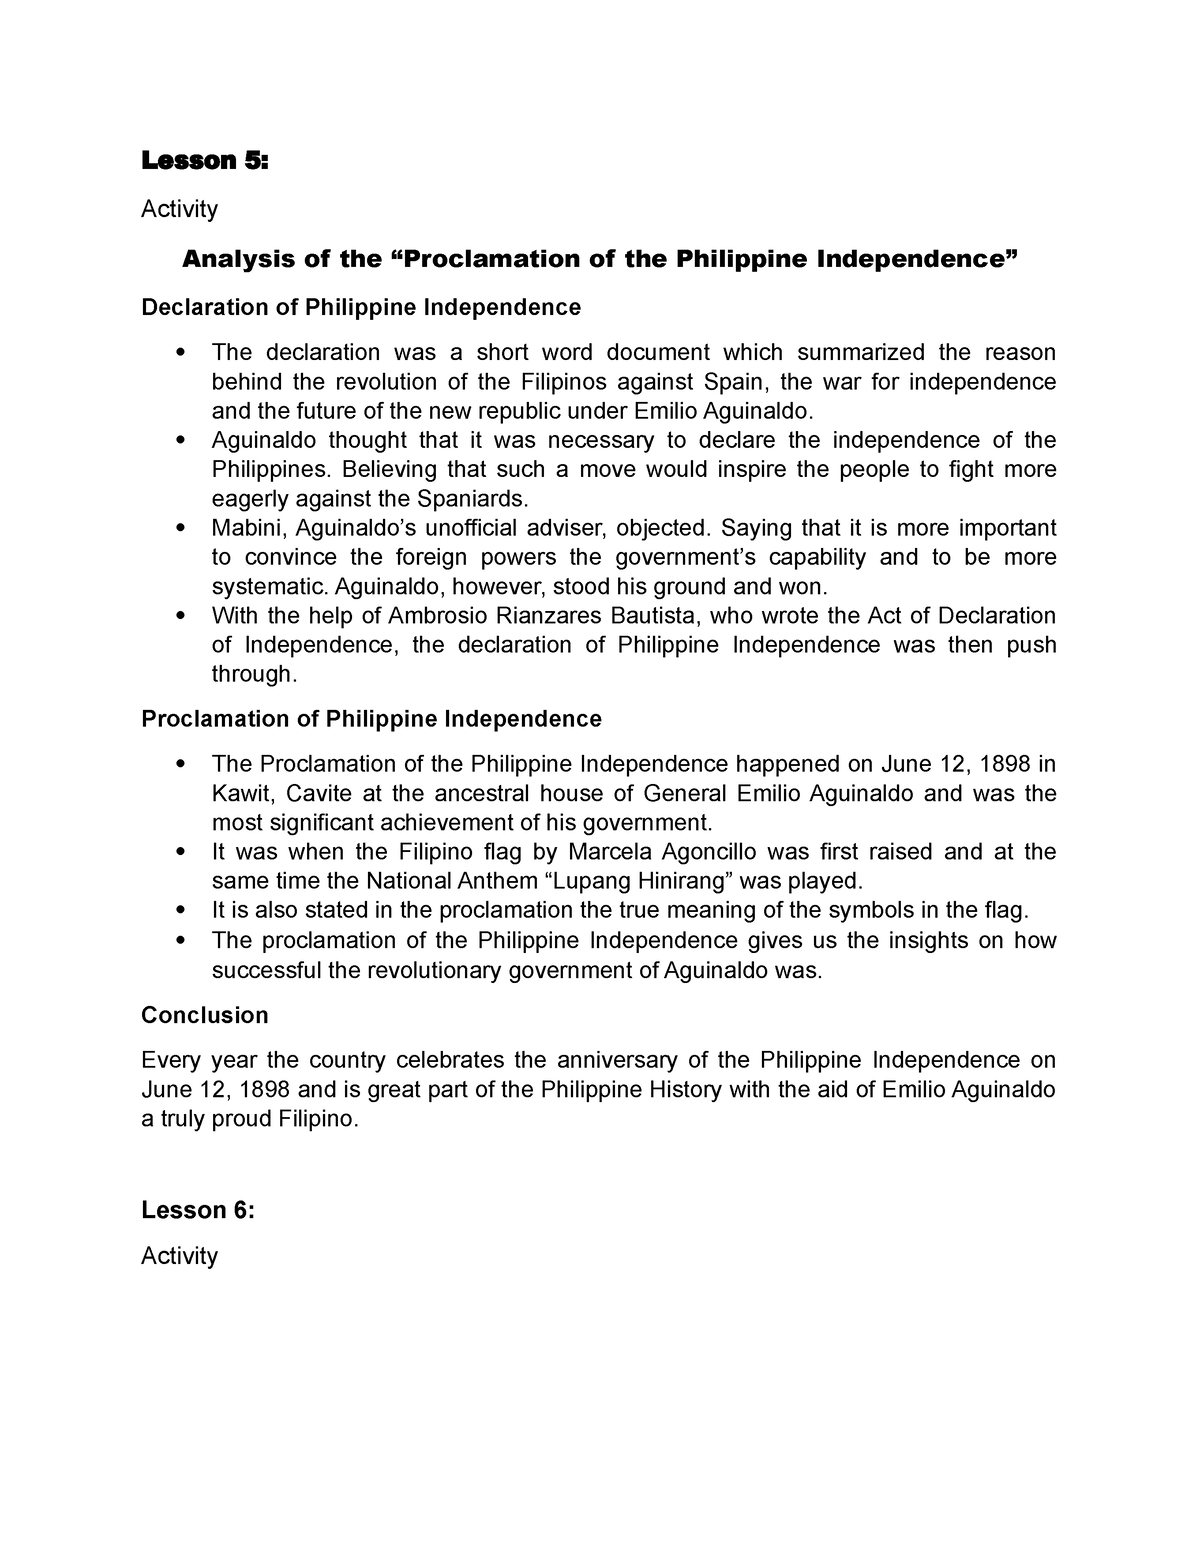 critical essay about proclamation of philippine independence